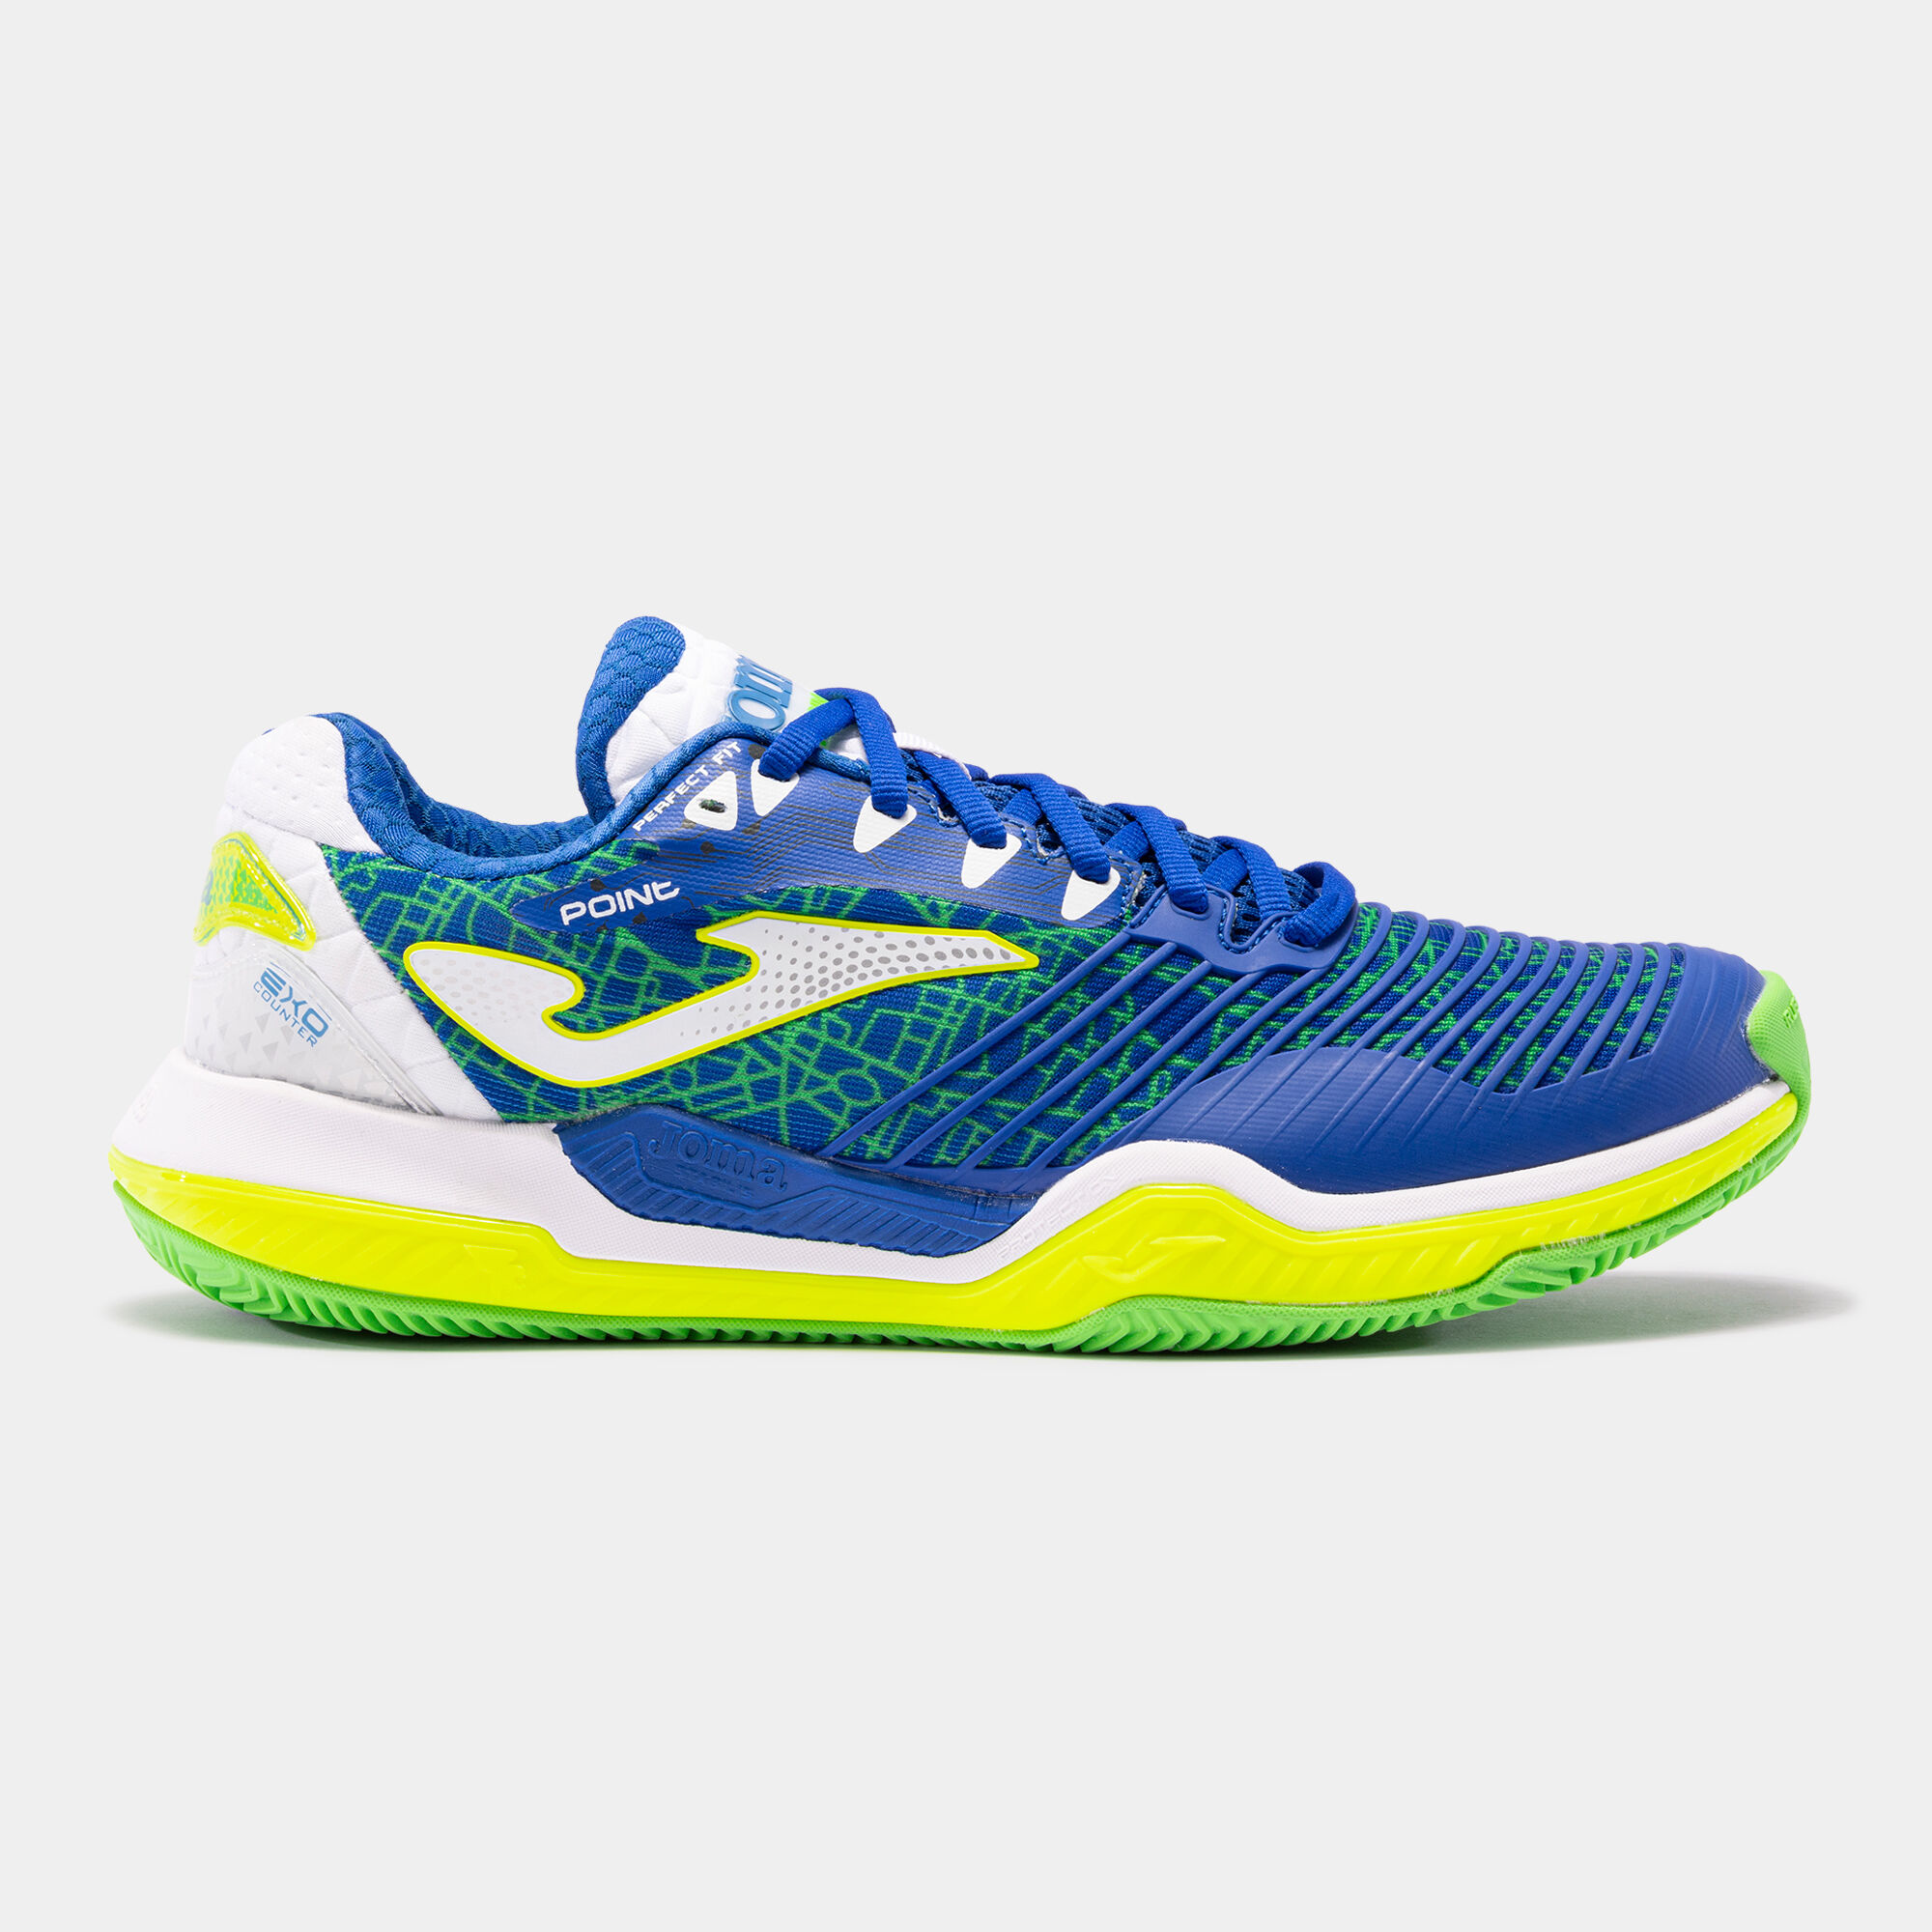 SHOES POINT 22 CLAY UNISEX ROYAL BLUE FLUORESCENT YELLOW